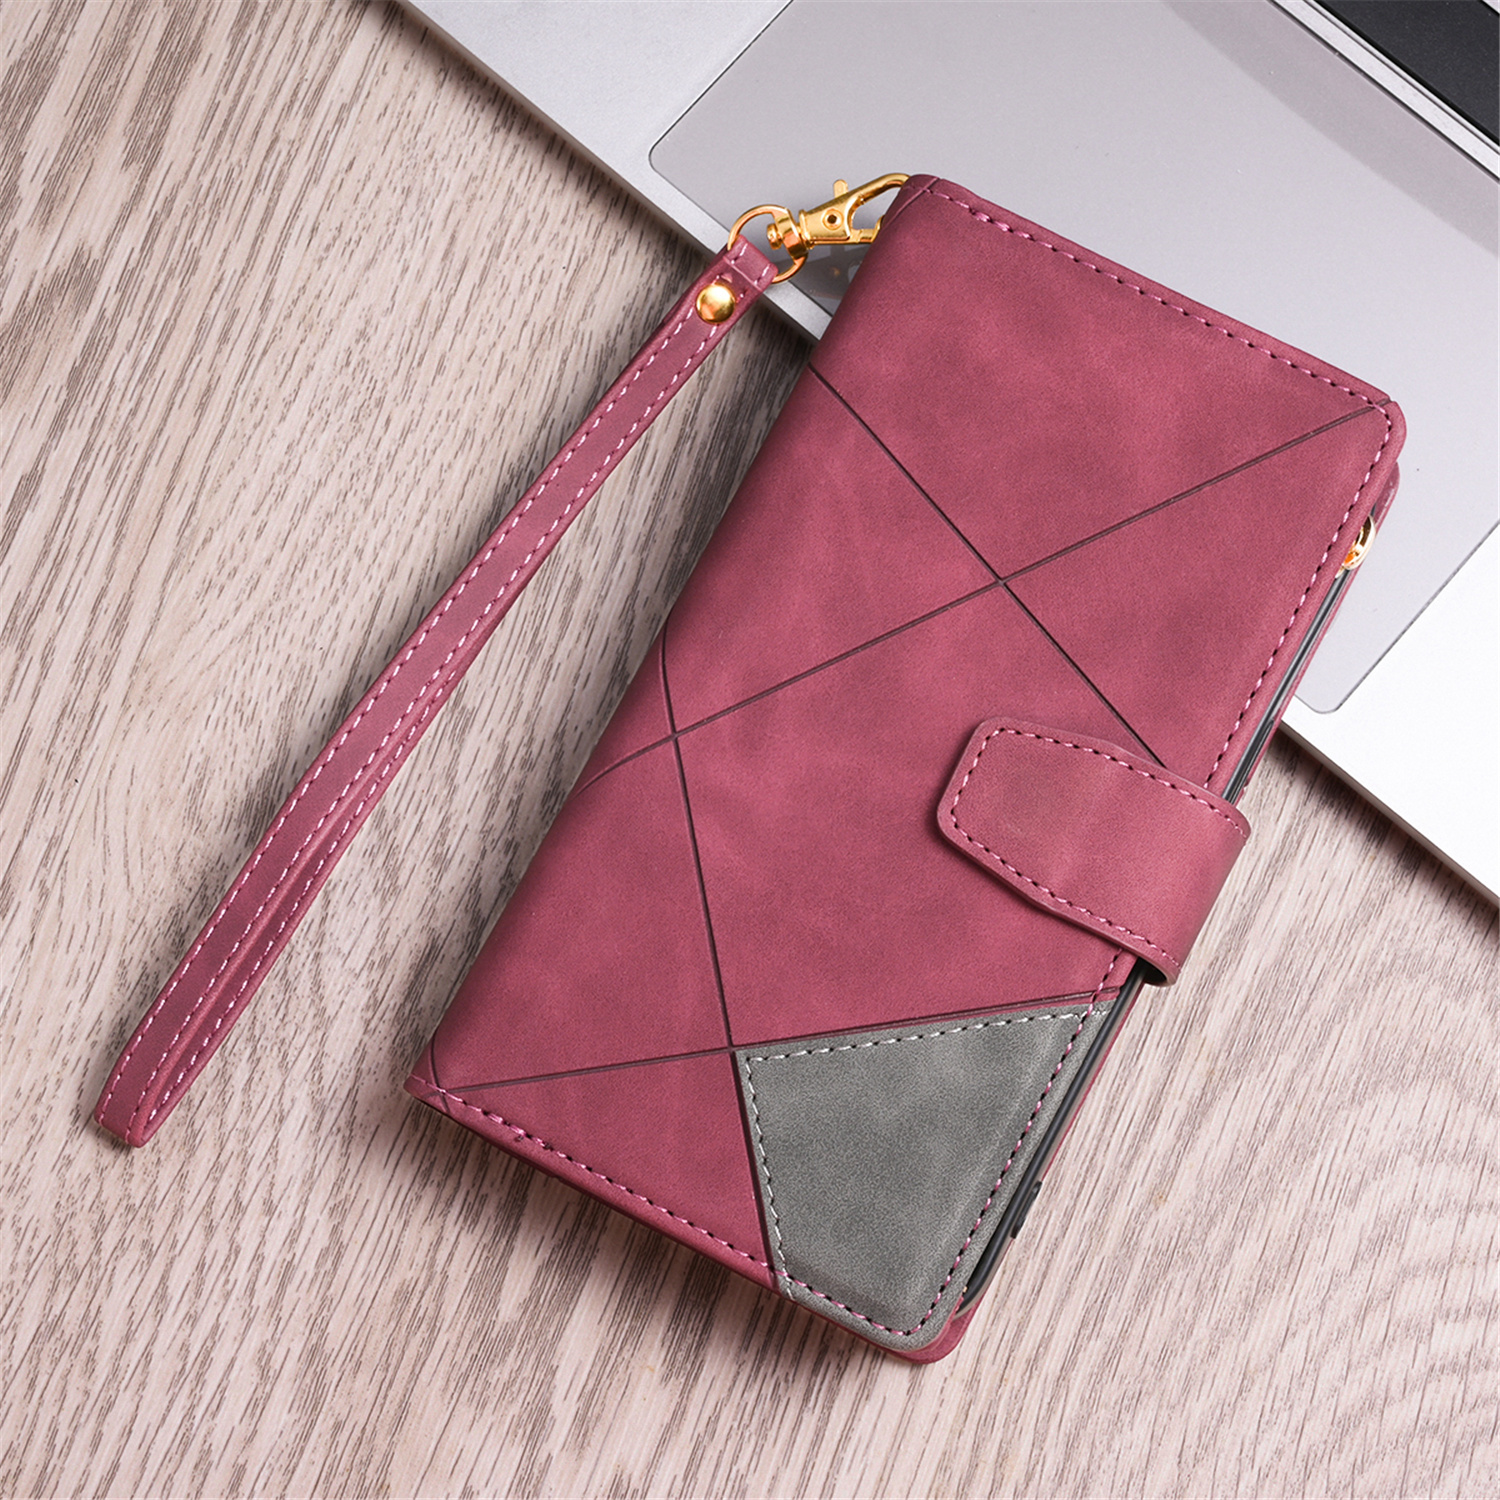 Tarise for Samsung Galaxy S21 Plus 5G Case Zipper Wallet with 9 Card Holder, S21+ Case for Women Men, Strap Wristlet Wristband Magnetic Kickstand Flip Phone Cover for Samsung S21 Plus 5G 6.7", Winered - image 3 of 9